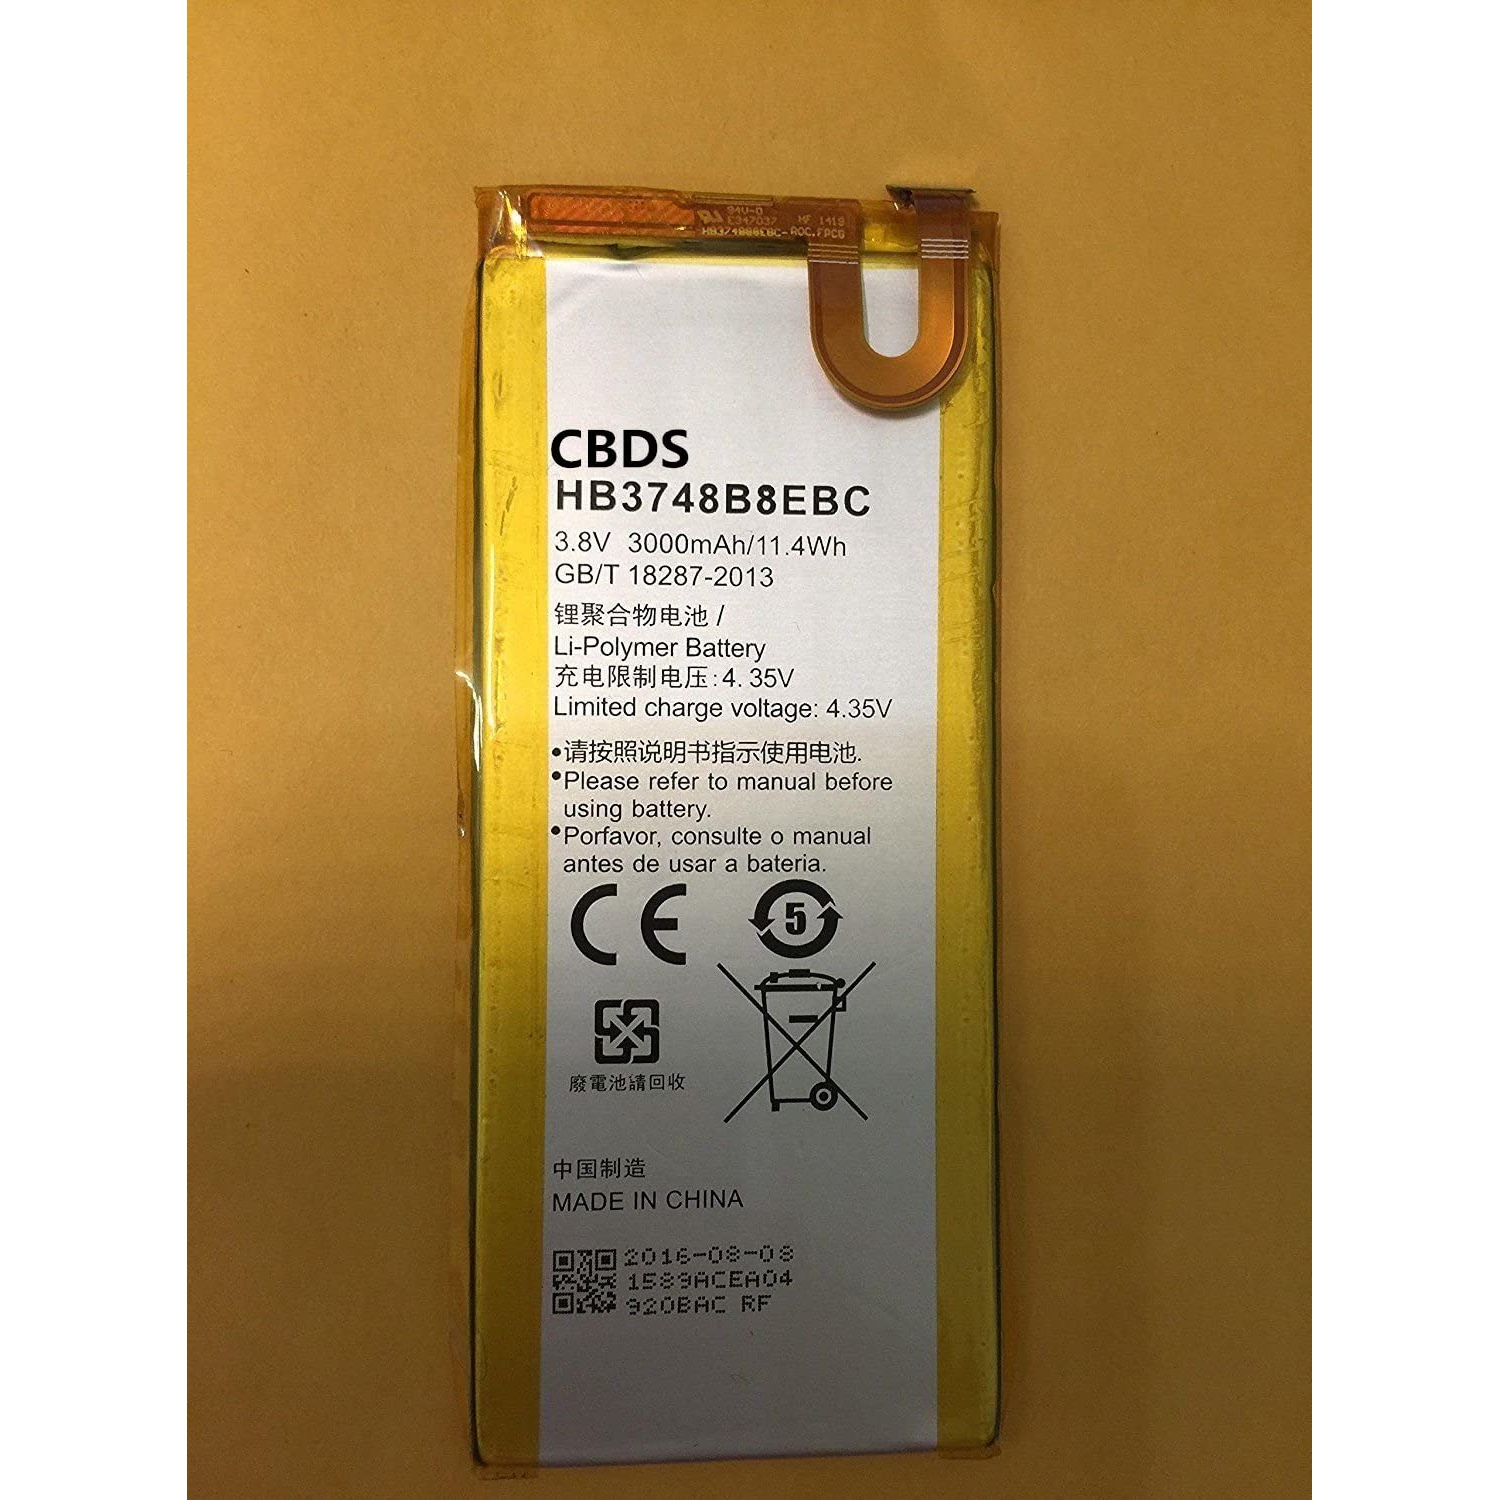 (CBDS) 3000mAh, 11.4 Wh Replacement Battery - Compatible with Huawei Ascend G7 HB3748B8EBC in Non-Retail Packaging